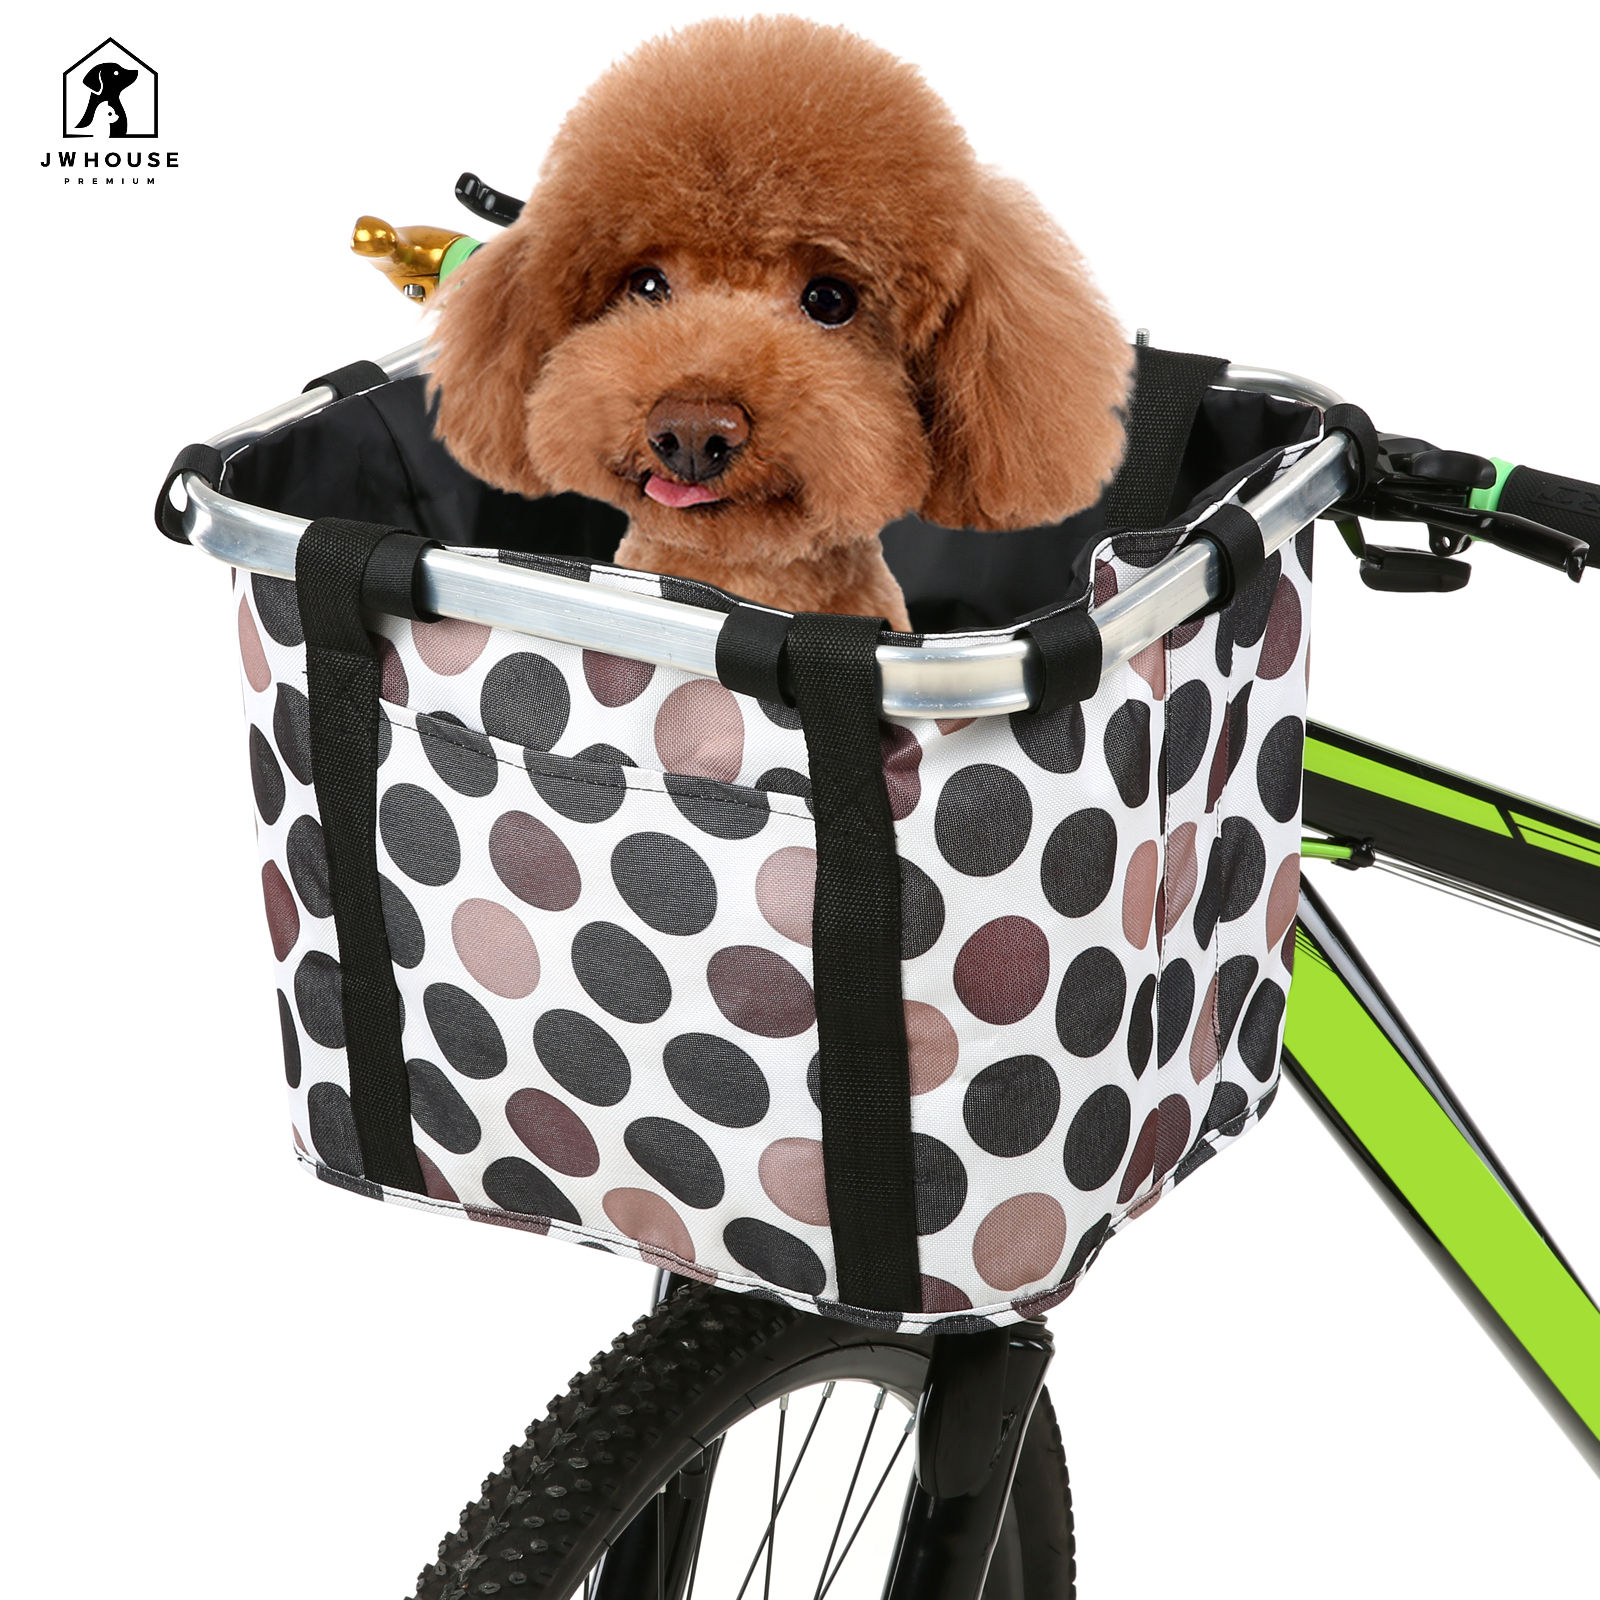 10KG Load Bicycle Basket Pouch Bike Bags Bicycle Front Bag Pet Carrier Cycling - Bicycle bag - 2